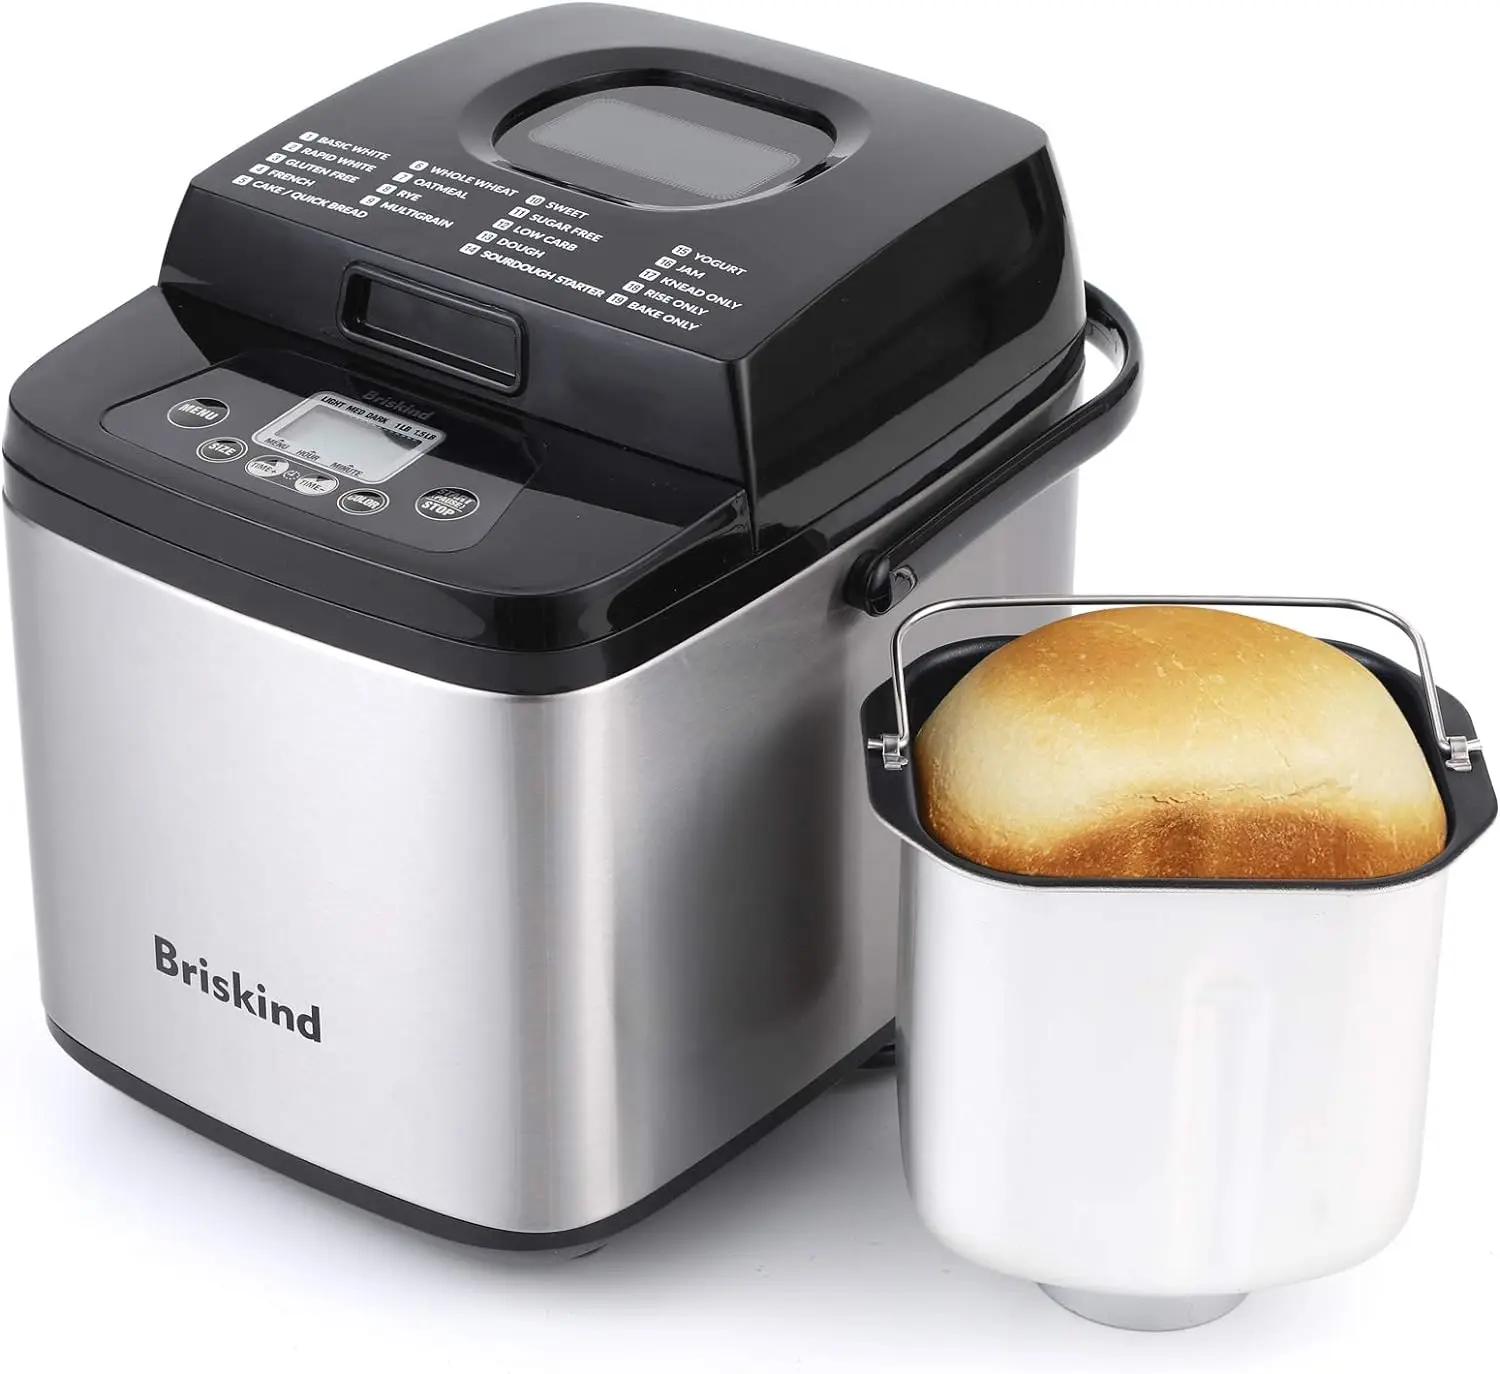 

19-in-1 Compact Bread Maker Machine, 1.5 lb / 1 lb Loaf Small Breadmaker with Carrying Handle, Including Gluten Free, Dough, Jam